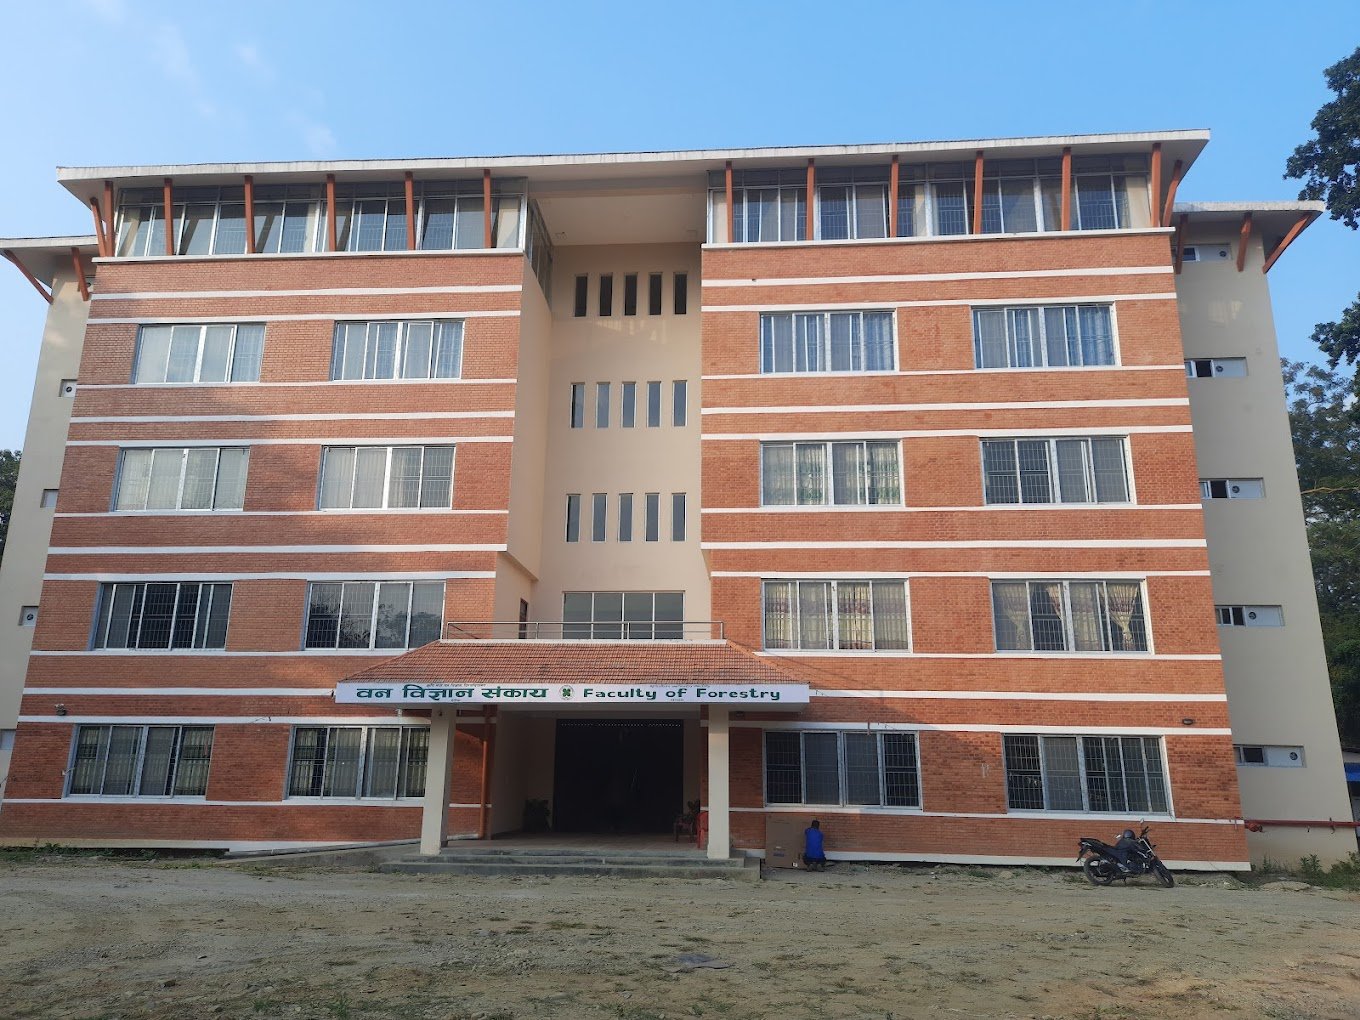 Faculty of Forestry, Agriculture and Forestry University